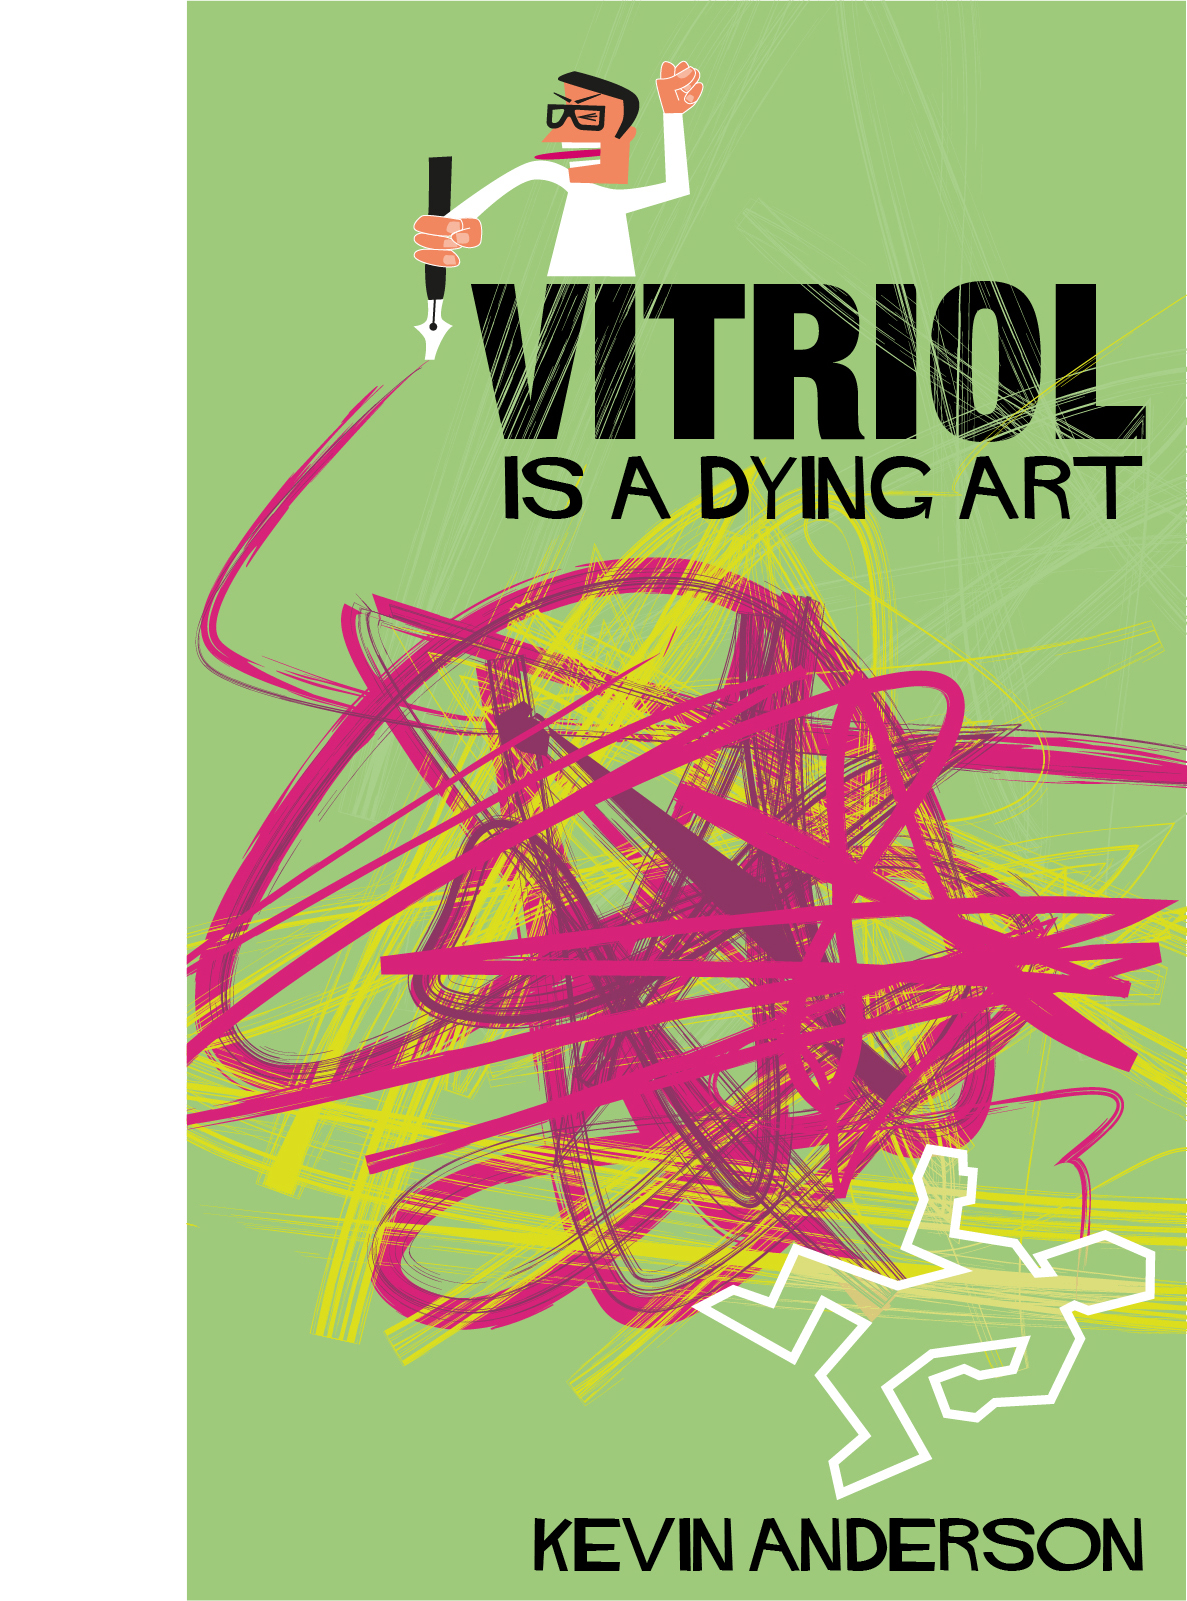 Kindle, Amazon, e-book, book cover, illustration, Kevin Anderson, Vitriol is a Dying Art